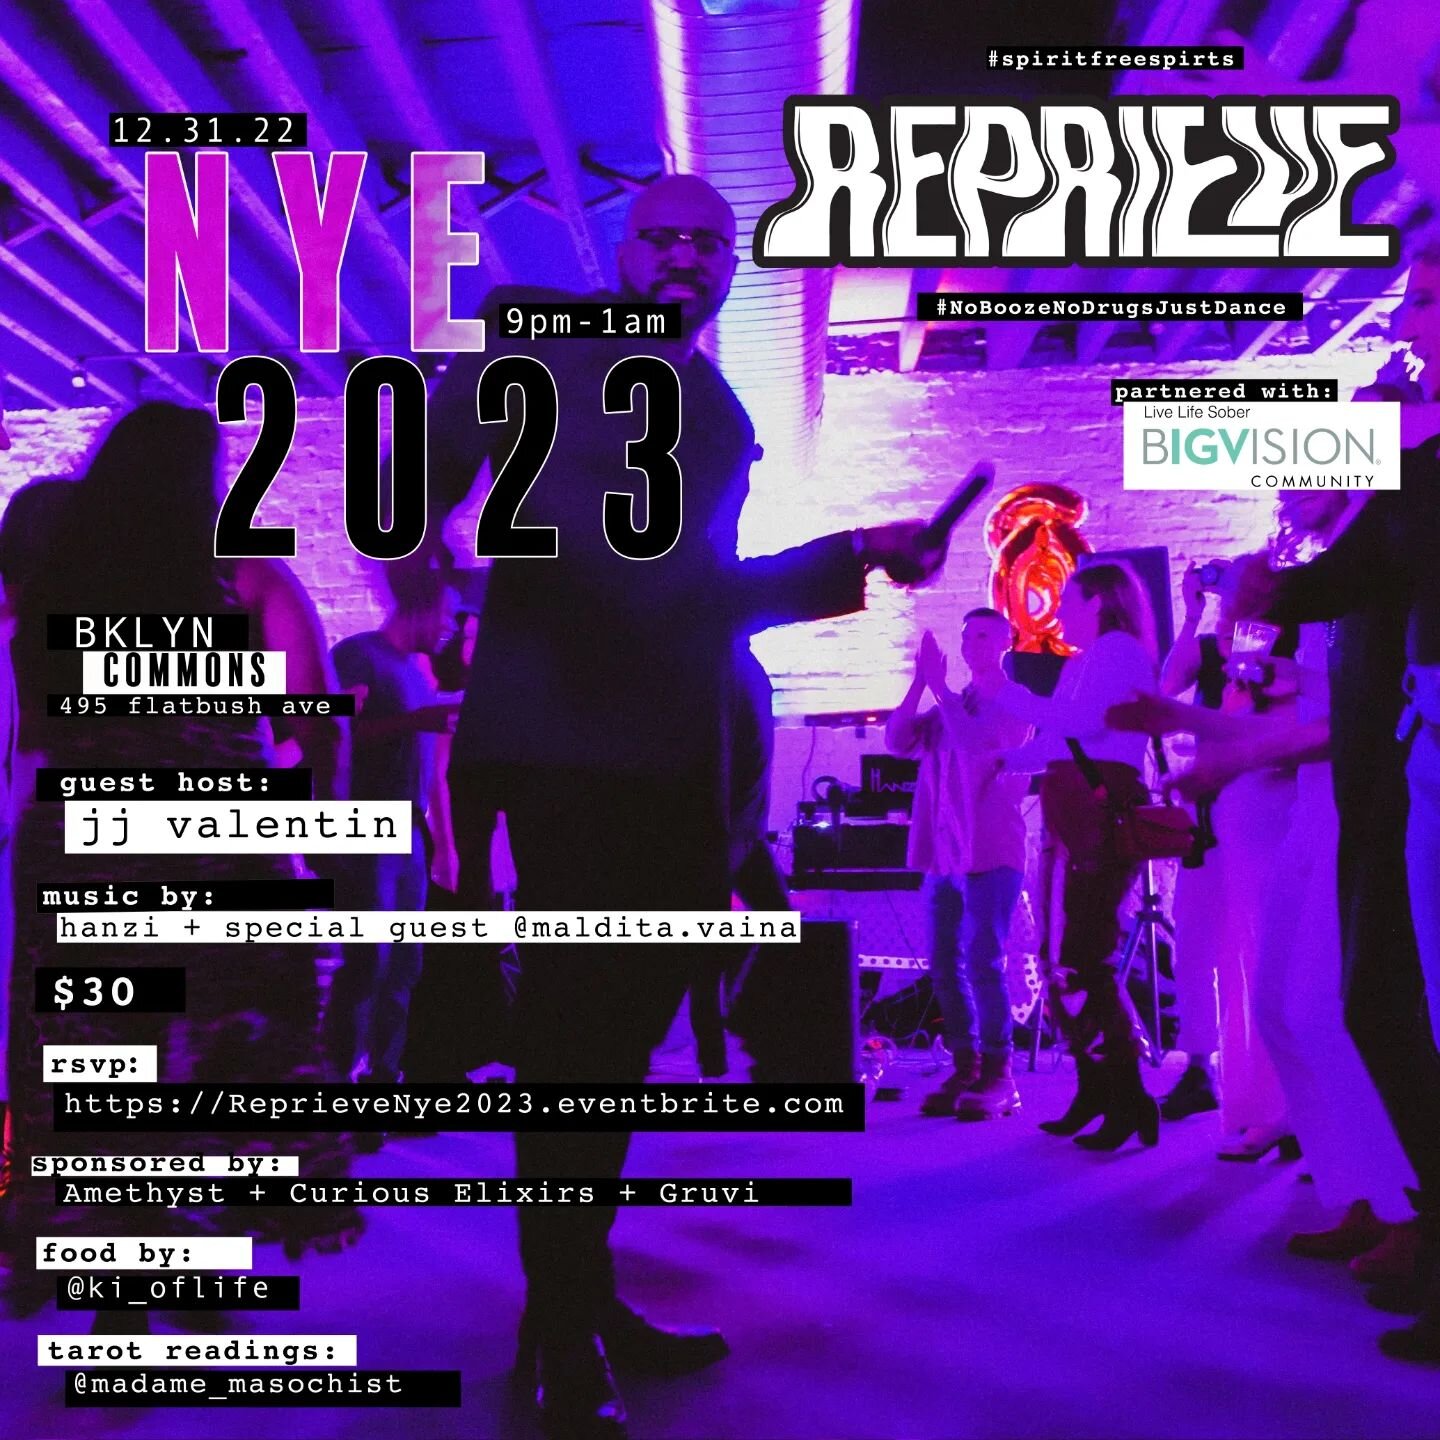 ⚠️We're just about 3 DAYS AWAY from NYE 2023 with @reprieveparty &amp; @bigvisionnyc 🎇

✨✨✨It's also a very special day for the man featured on today's flyer....🎁🎂HAPPY BIRTHDAY @djhanzi our founder and one of our resident DJs!!! 

💜 We love you 